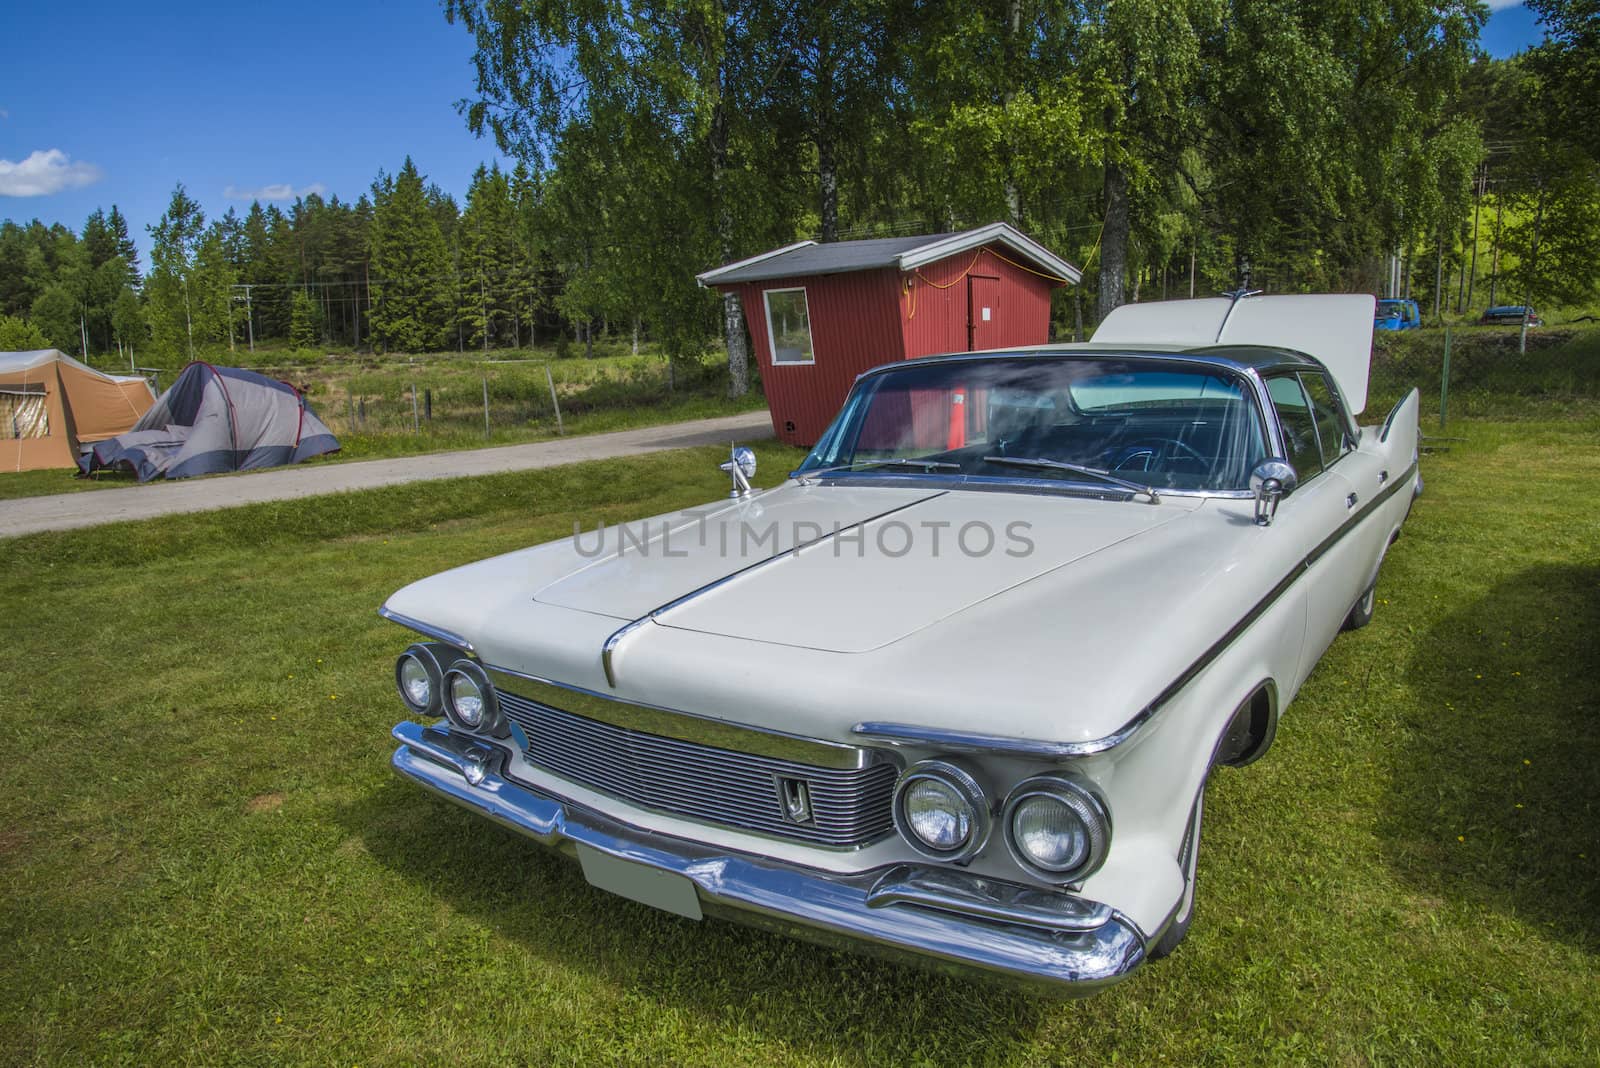 1961 Chrysler Imperial. The image is shot by Dawn at the Farm in Halden, Norway